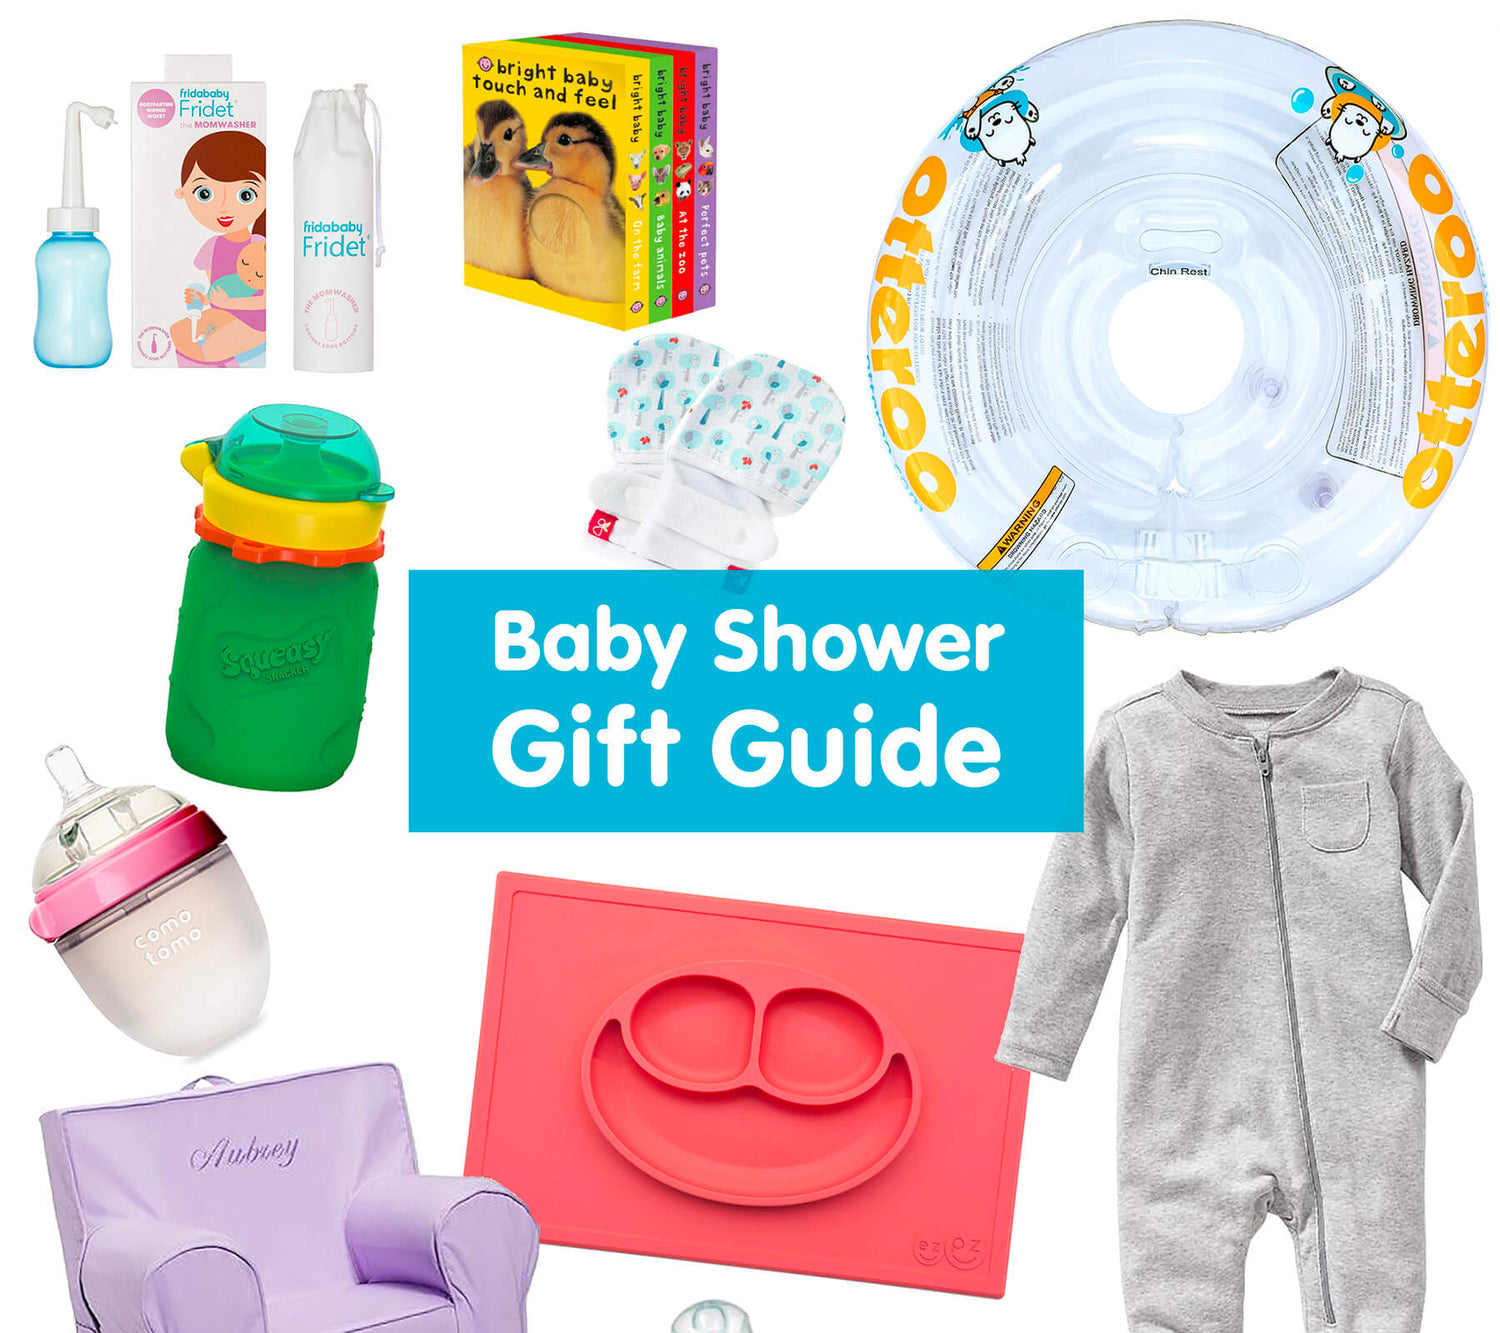 Go-to Gift Guide for Baby Showers